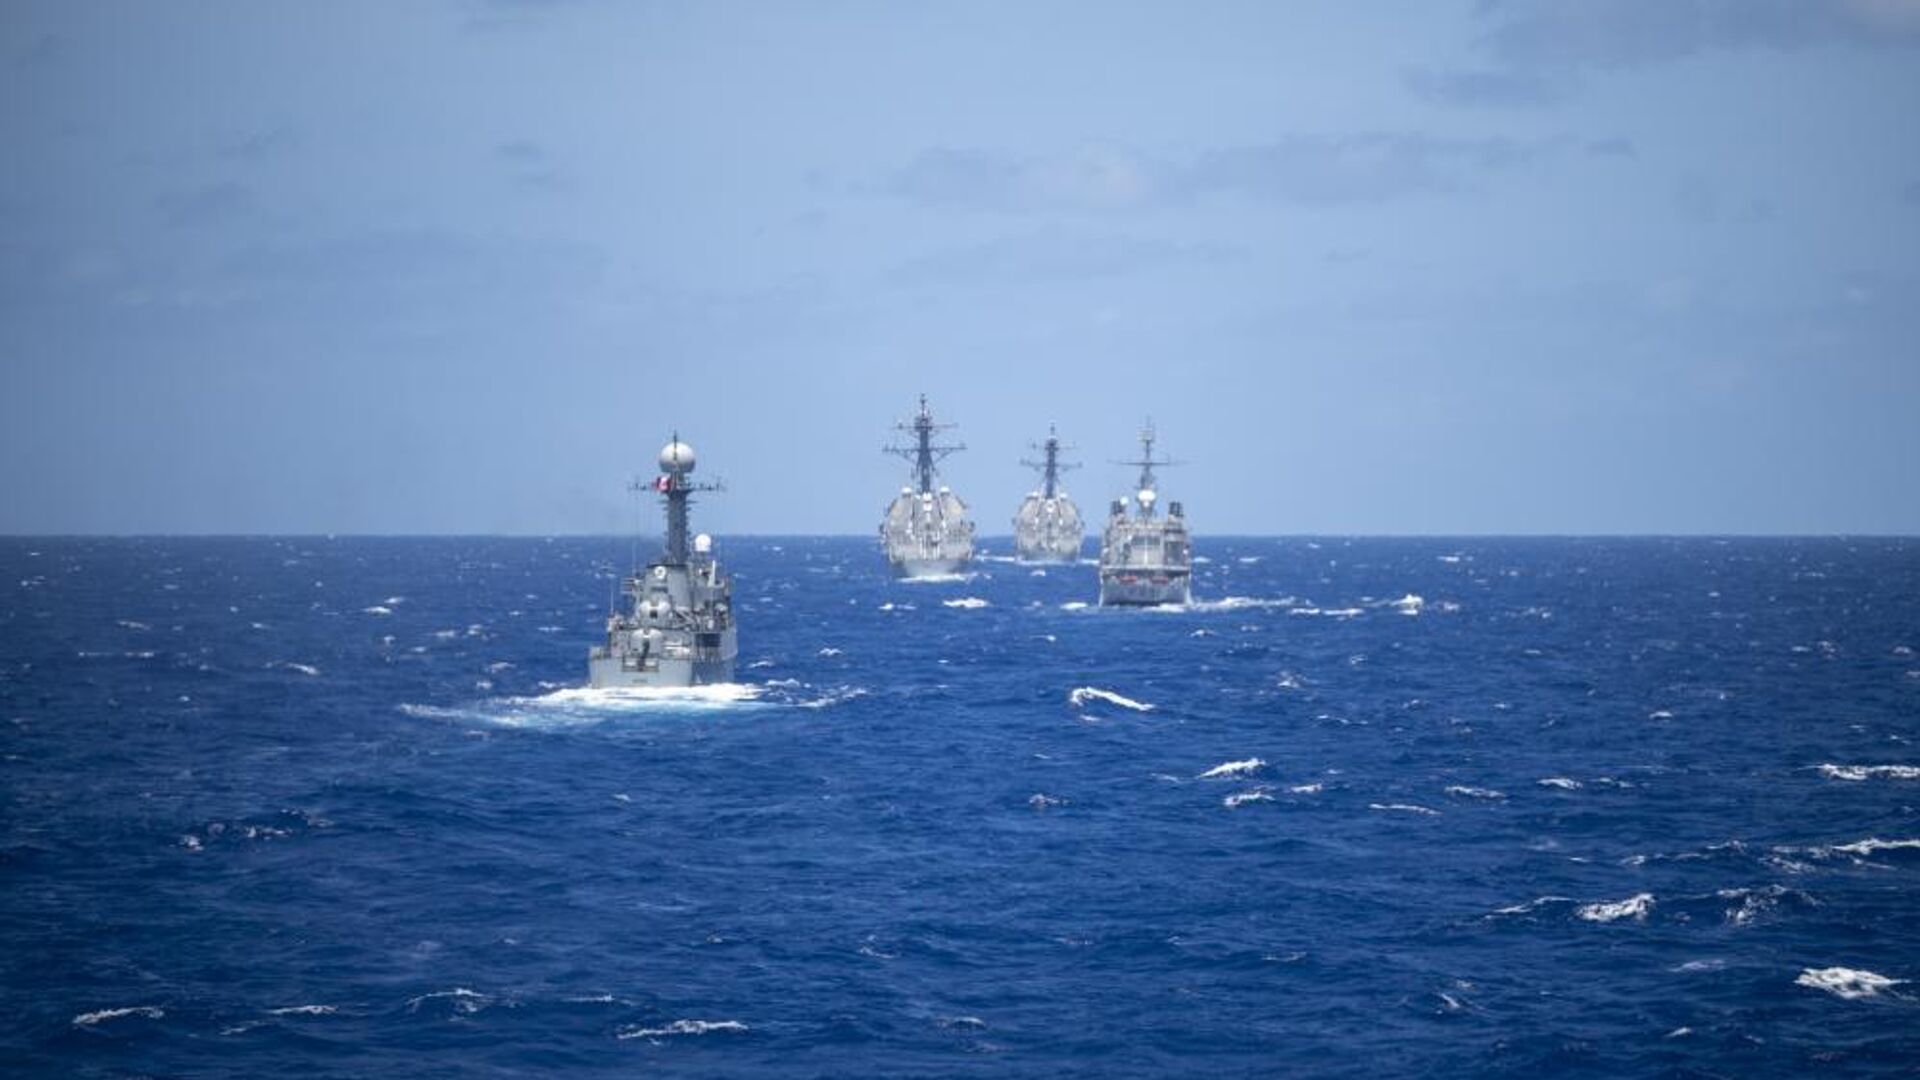 Peruvian Navy corvette BAP Guise (CC-28), French Navy frigate FS Prairial (F731), Arleigh Burke-class guided-missile destroyer USS Chafee (DDG 90) and the Arleigh Burke-class guided-missile destroyer USS Gridley (DDG 101) gather in formation in front of legend-class cutter USCGC Midgett (WMSL 757) during a ship maneuver exercise during Rim of the Pacific (RIMPAC) 2022.
 - Sputnik International, 1920, 28.03.2023